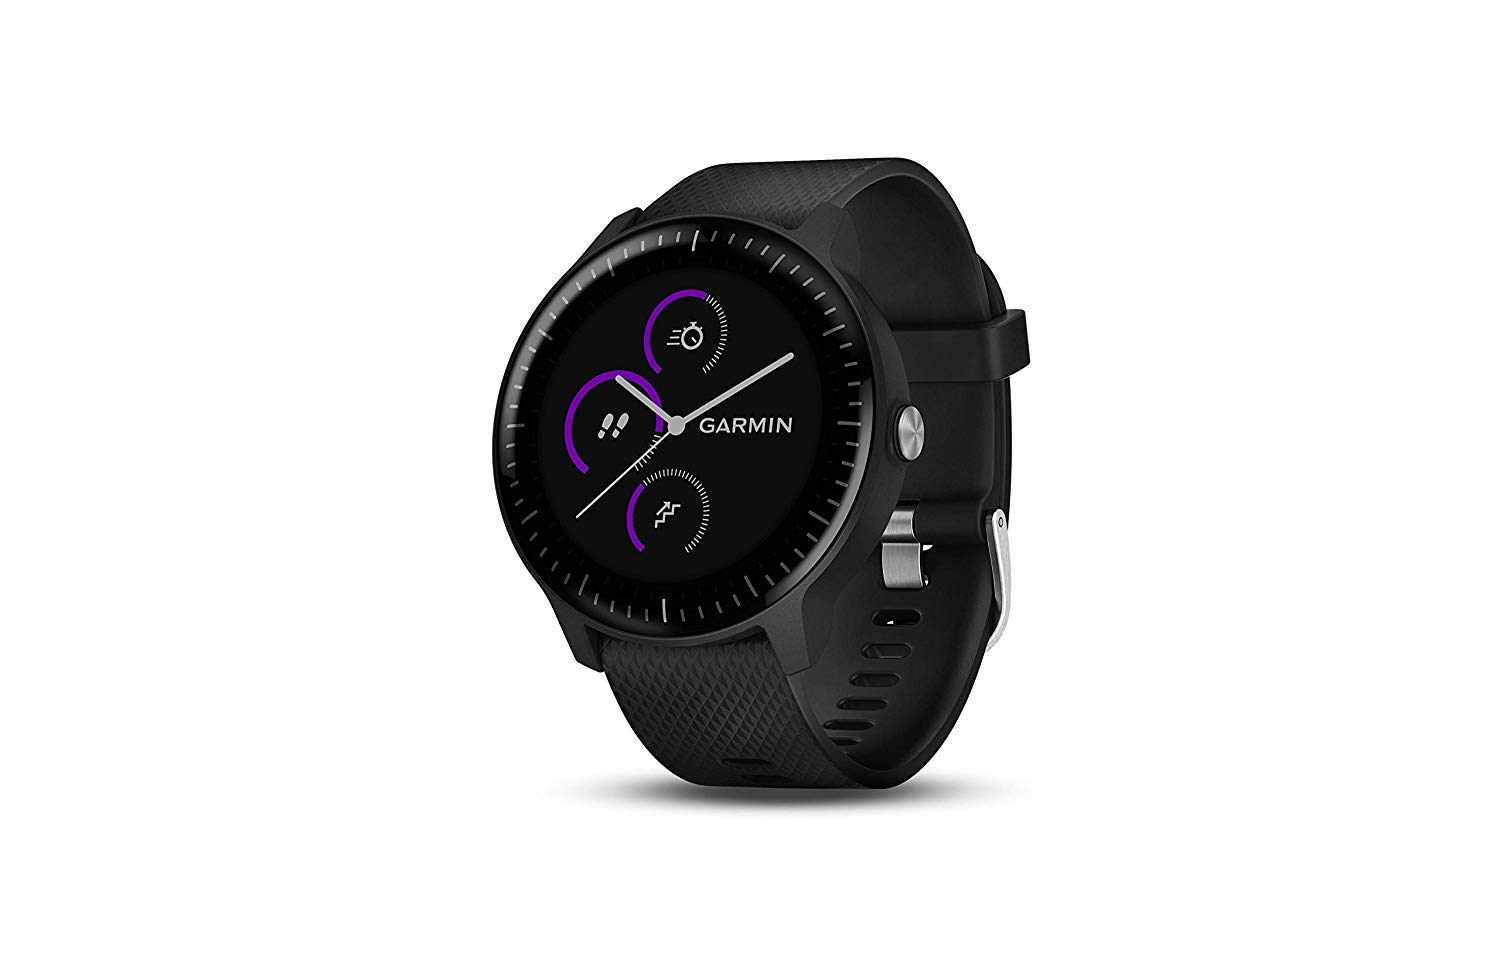 Garmin Vivoactive 3 GPS Smart Watch is one of the best smartwatches in India